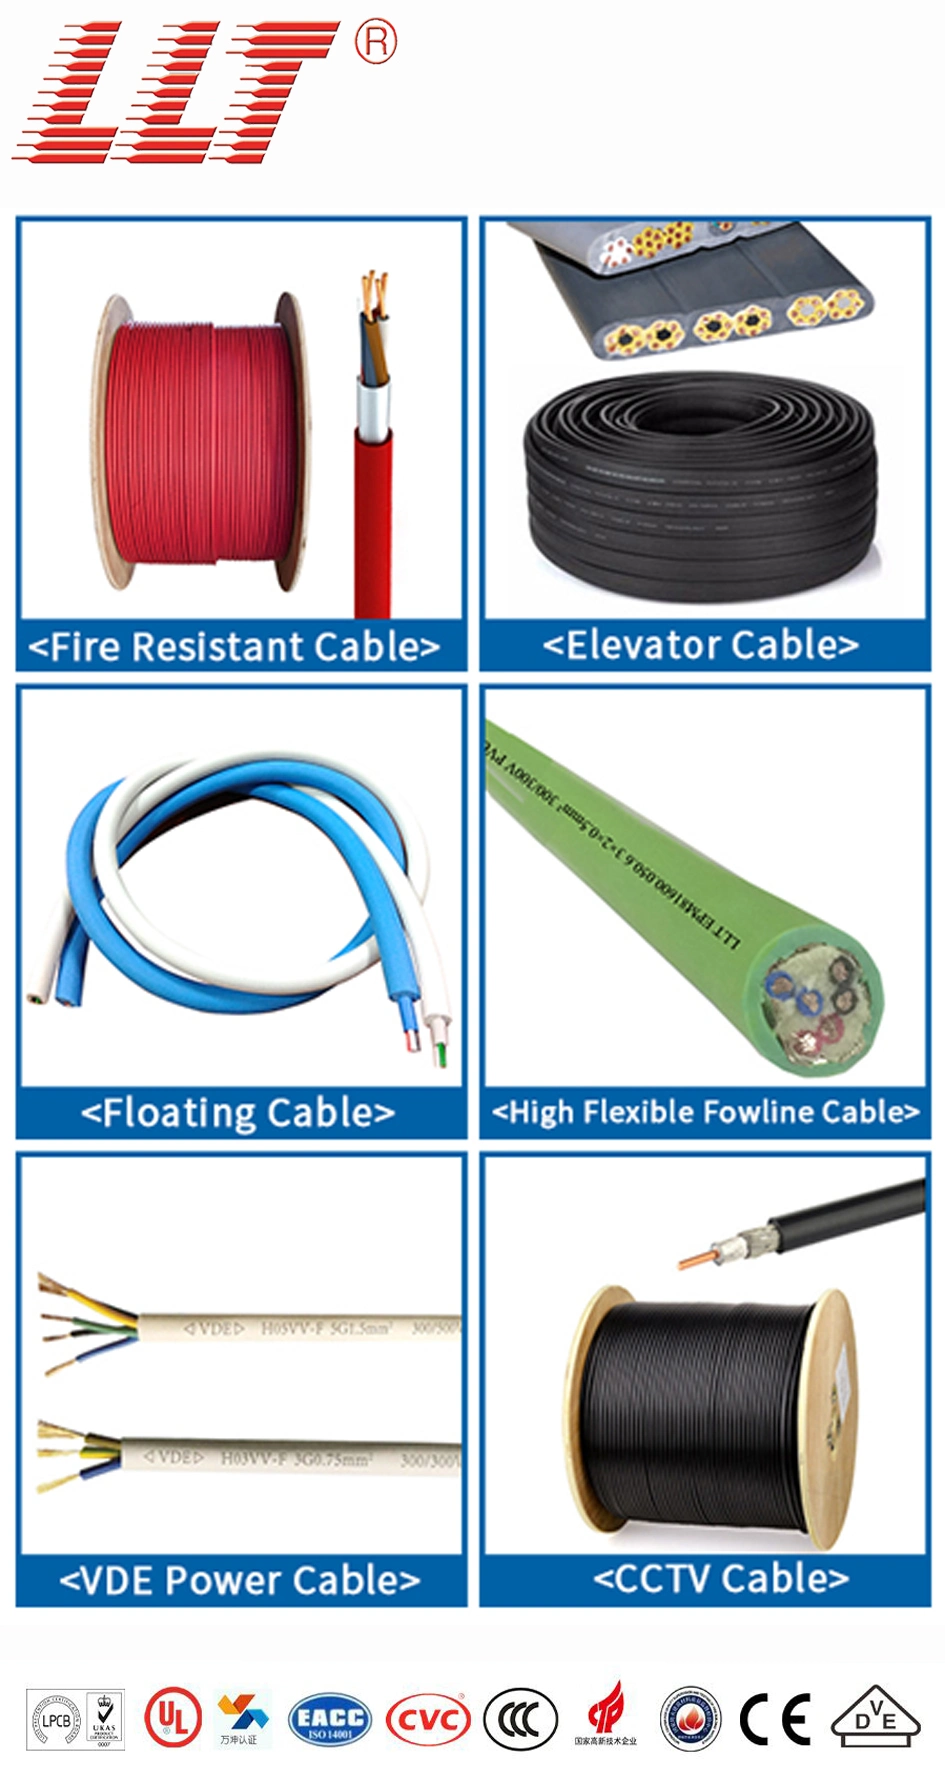 Electric Wire Cable Silicone Rubber Jacket Copper Wire Flame Retardant Fire Alarm Cable Fire Alarm System Security Alarm Systems Smoke Detector Control Panel